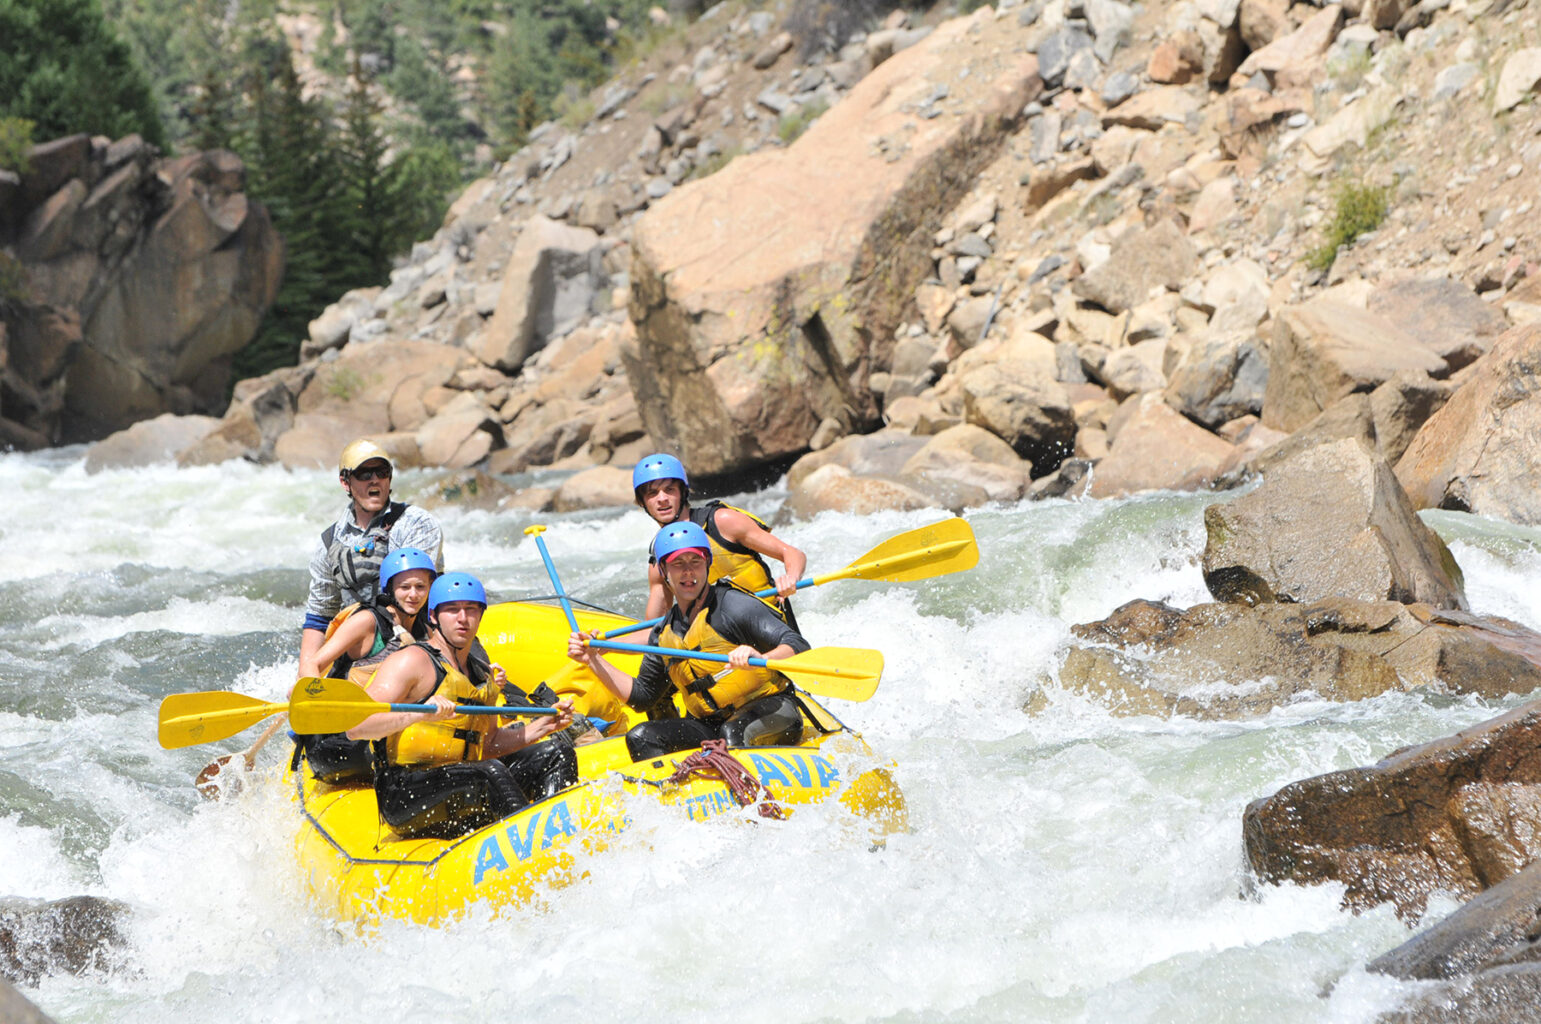 Colorado rafting day trip on the Arkansas River.